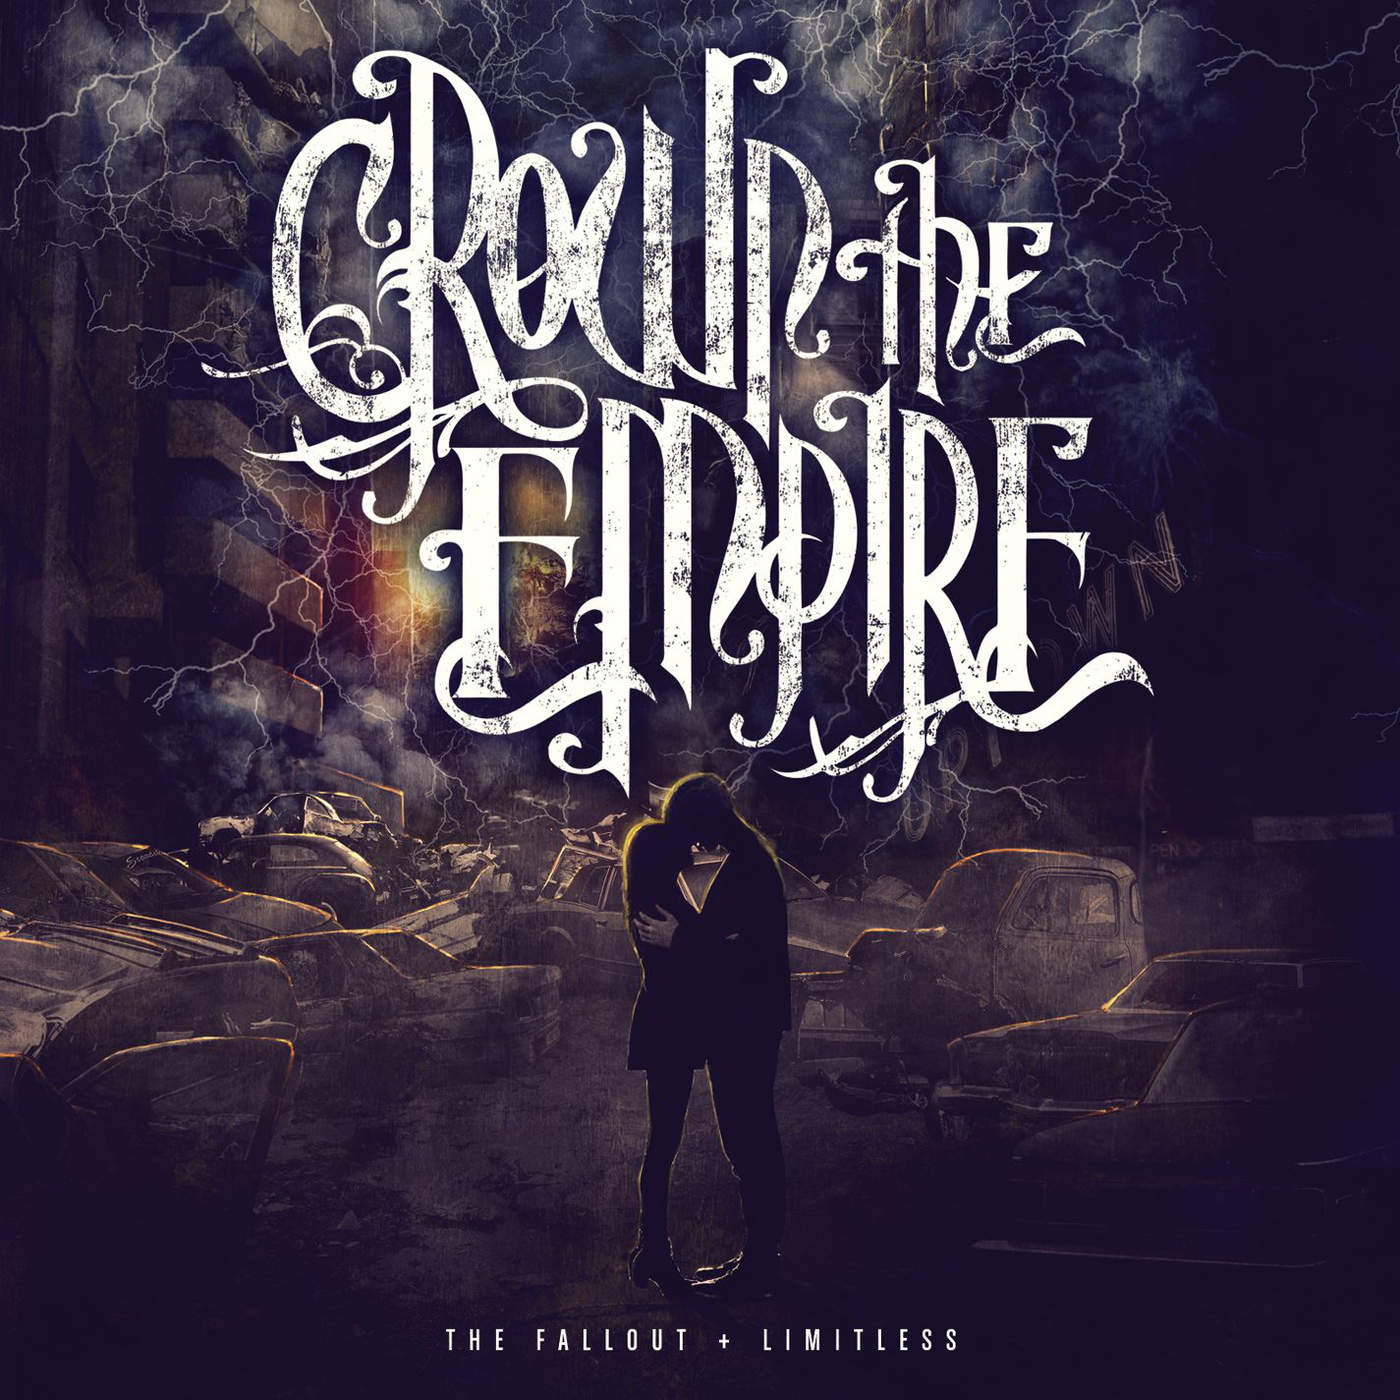 Crown the Empire - The Fallout (Deluxe Reissue) (2013) - Album [iTunes Plus AAC M4A]